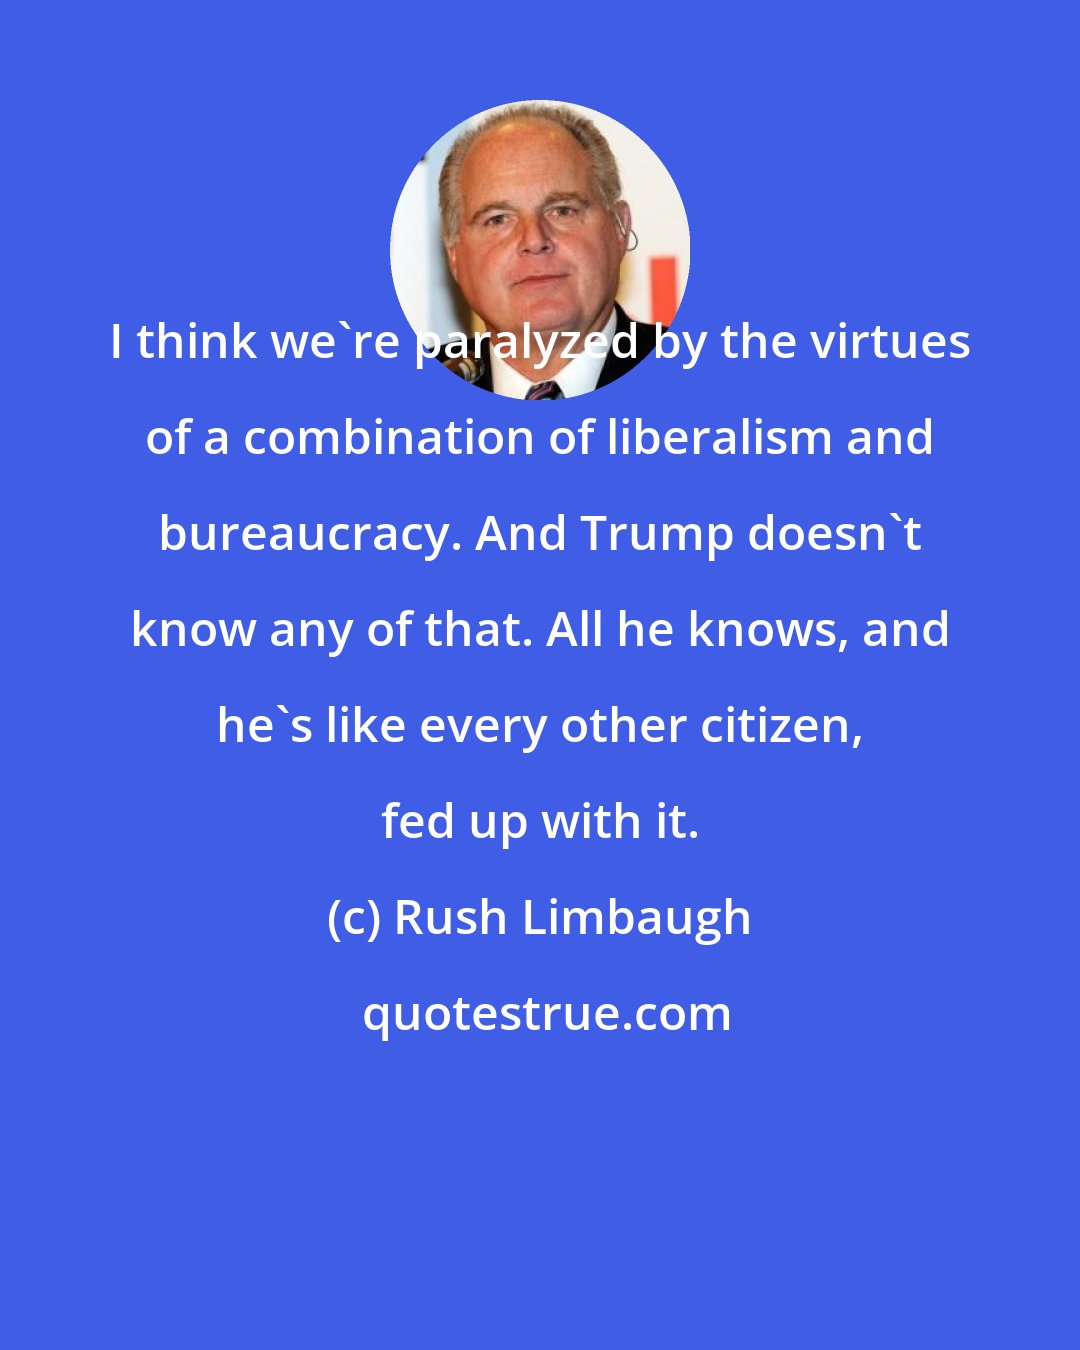 Rush Limbaugh: I think we're paralyzed by the virtues of a combination of liberalism and bureaucracy. And Trump doesn't know any of that. All he knows, and he's like every other citizen, fed up with it.